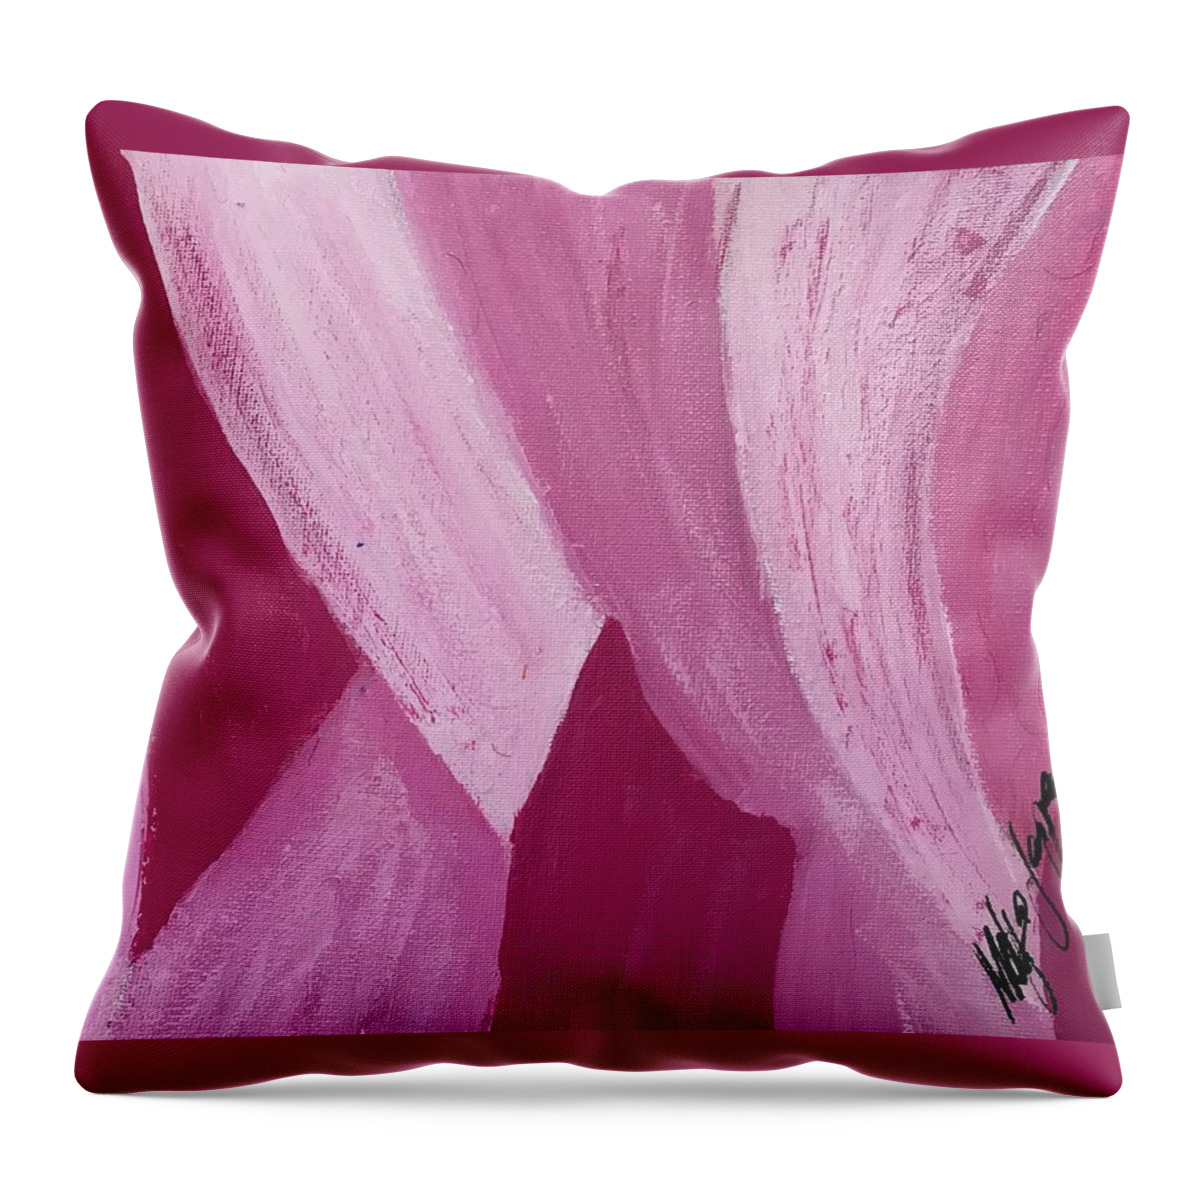 Femmes Throw Pillow featuring the painting Femmes by Medge Jaspan